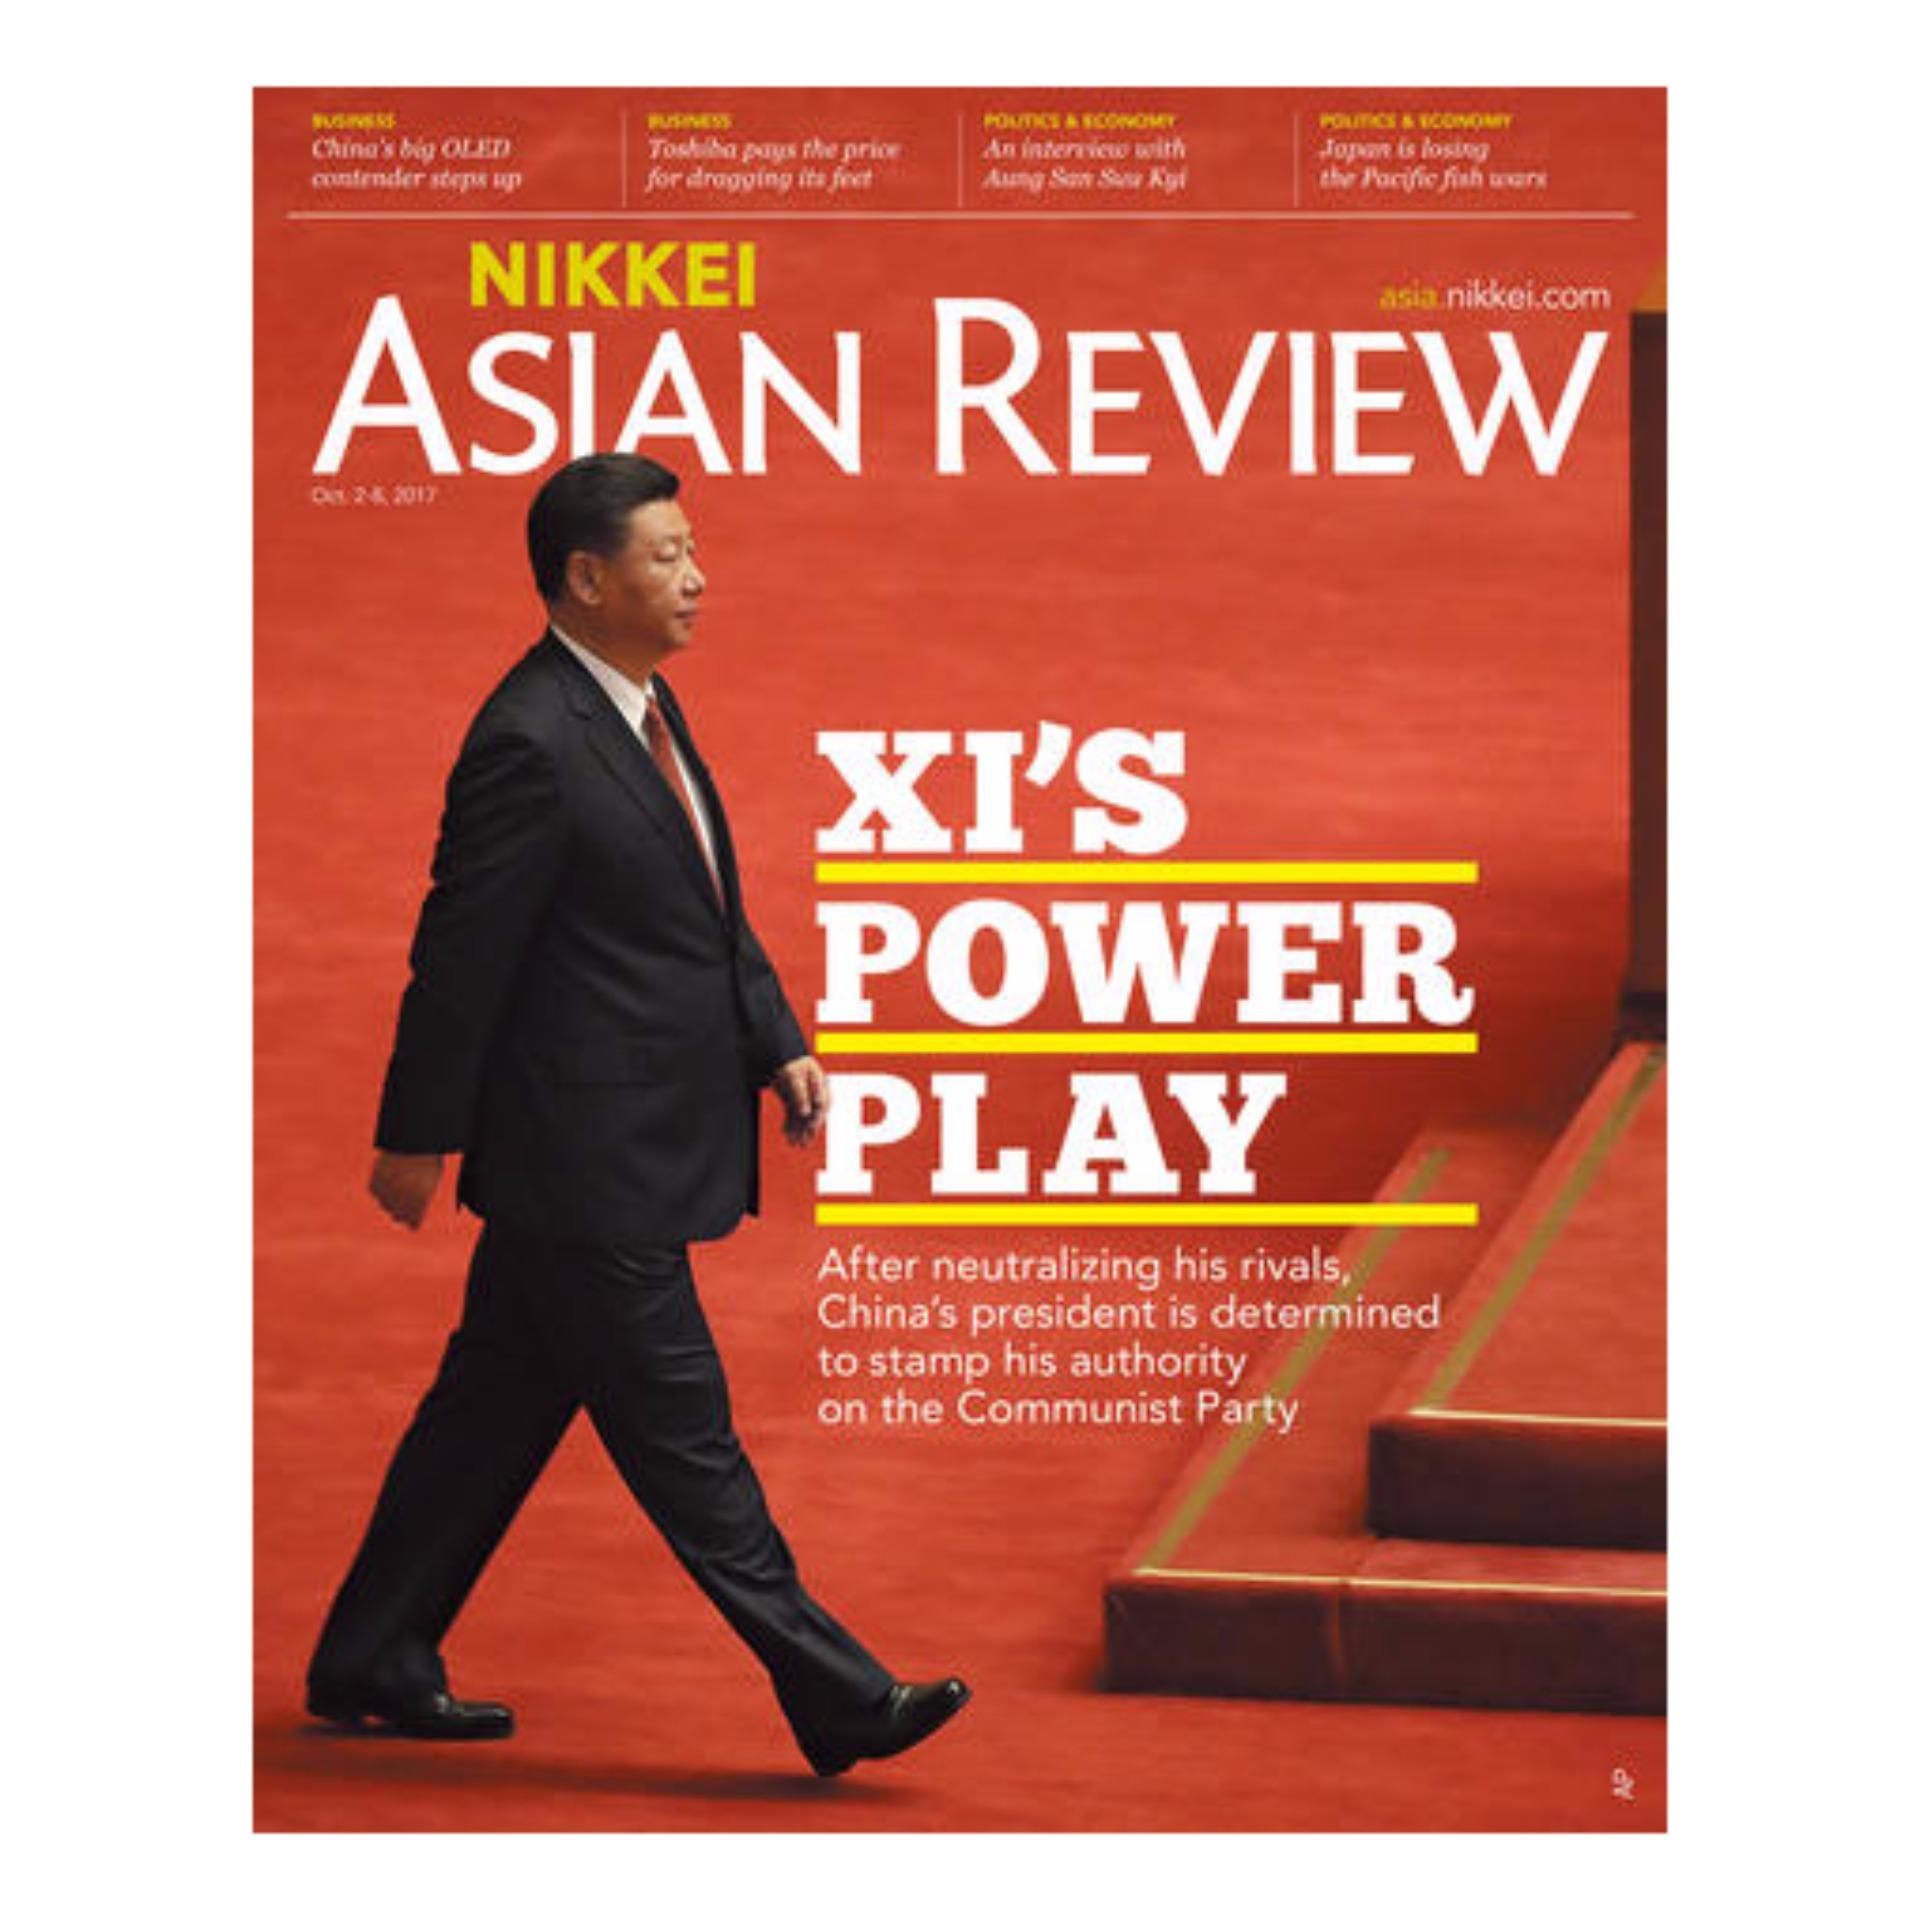 Nikkei Asian Review:XI's Power Play